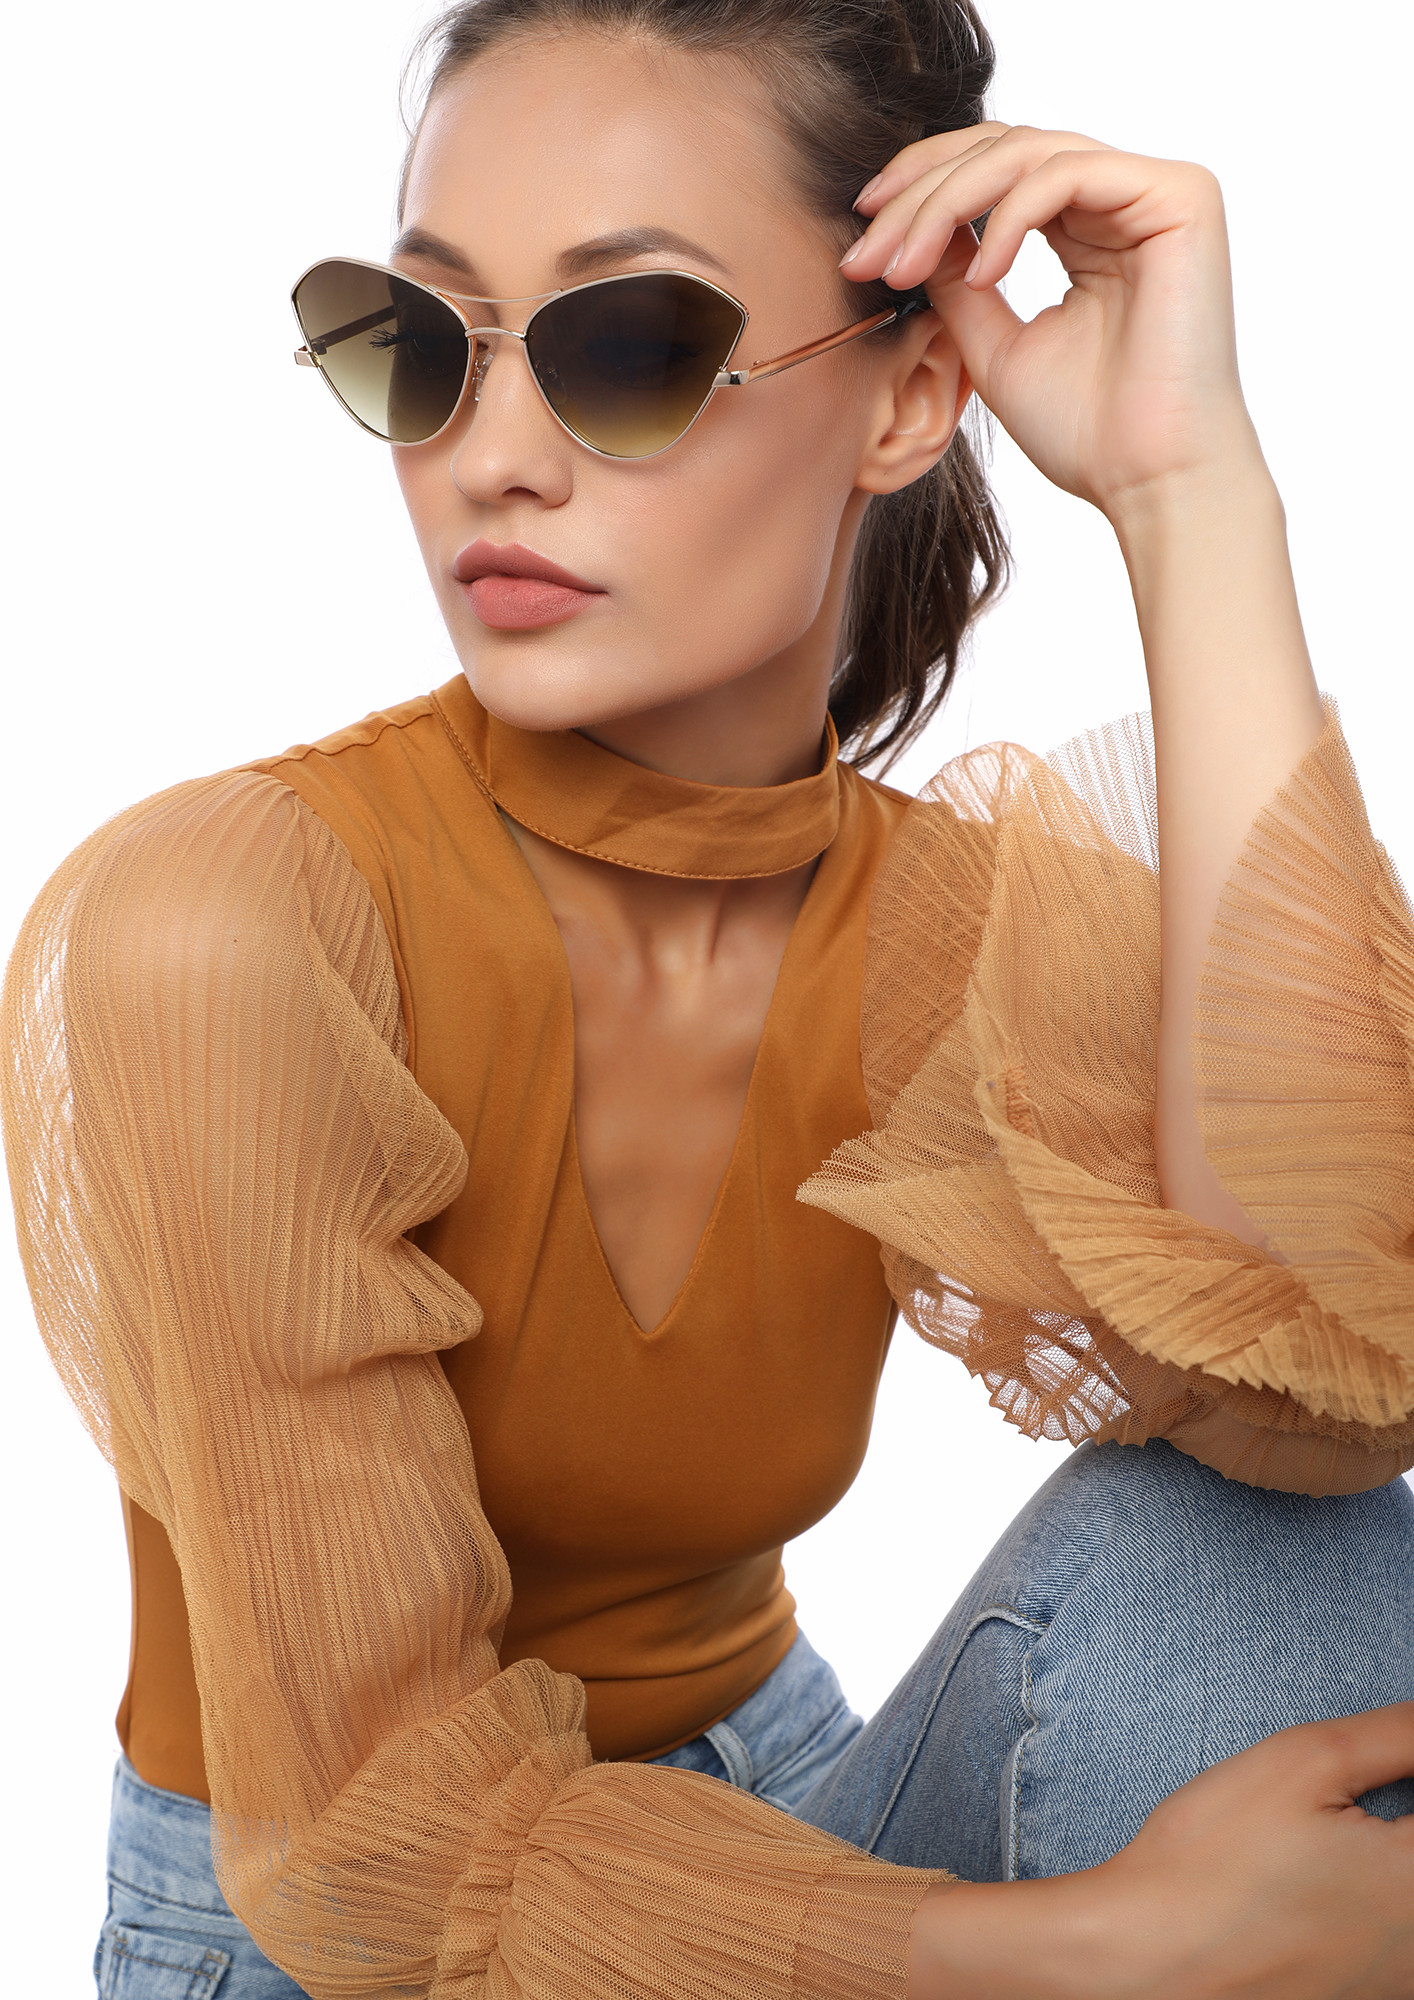 NOW OR NEVER BEACHY BROWN CATEYE SUNGLASSES